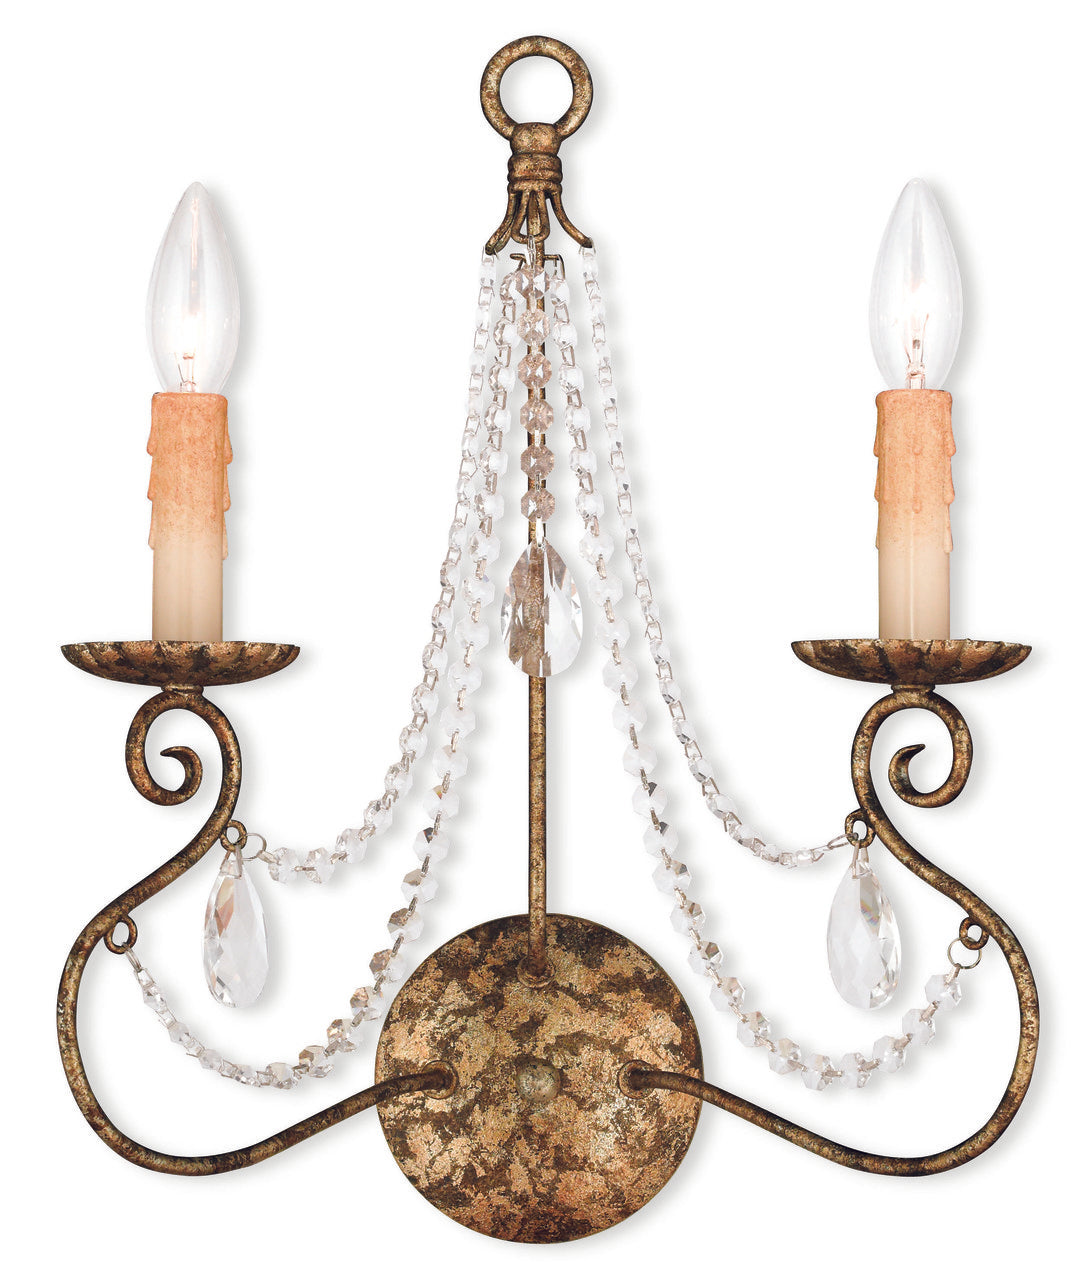 LIVEX Lighting 51902-36 Isabella Wall Sconce with Hand-Applied European Bronze (2 Light)